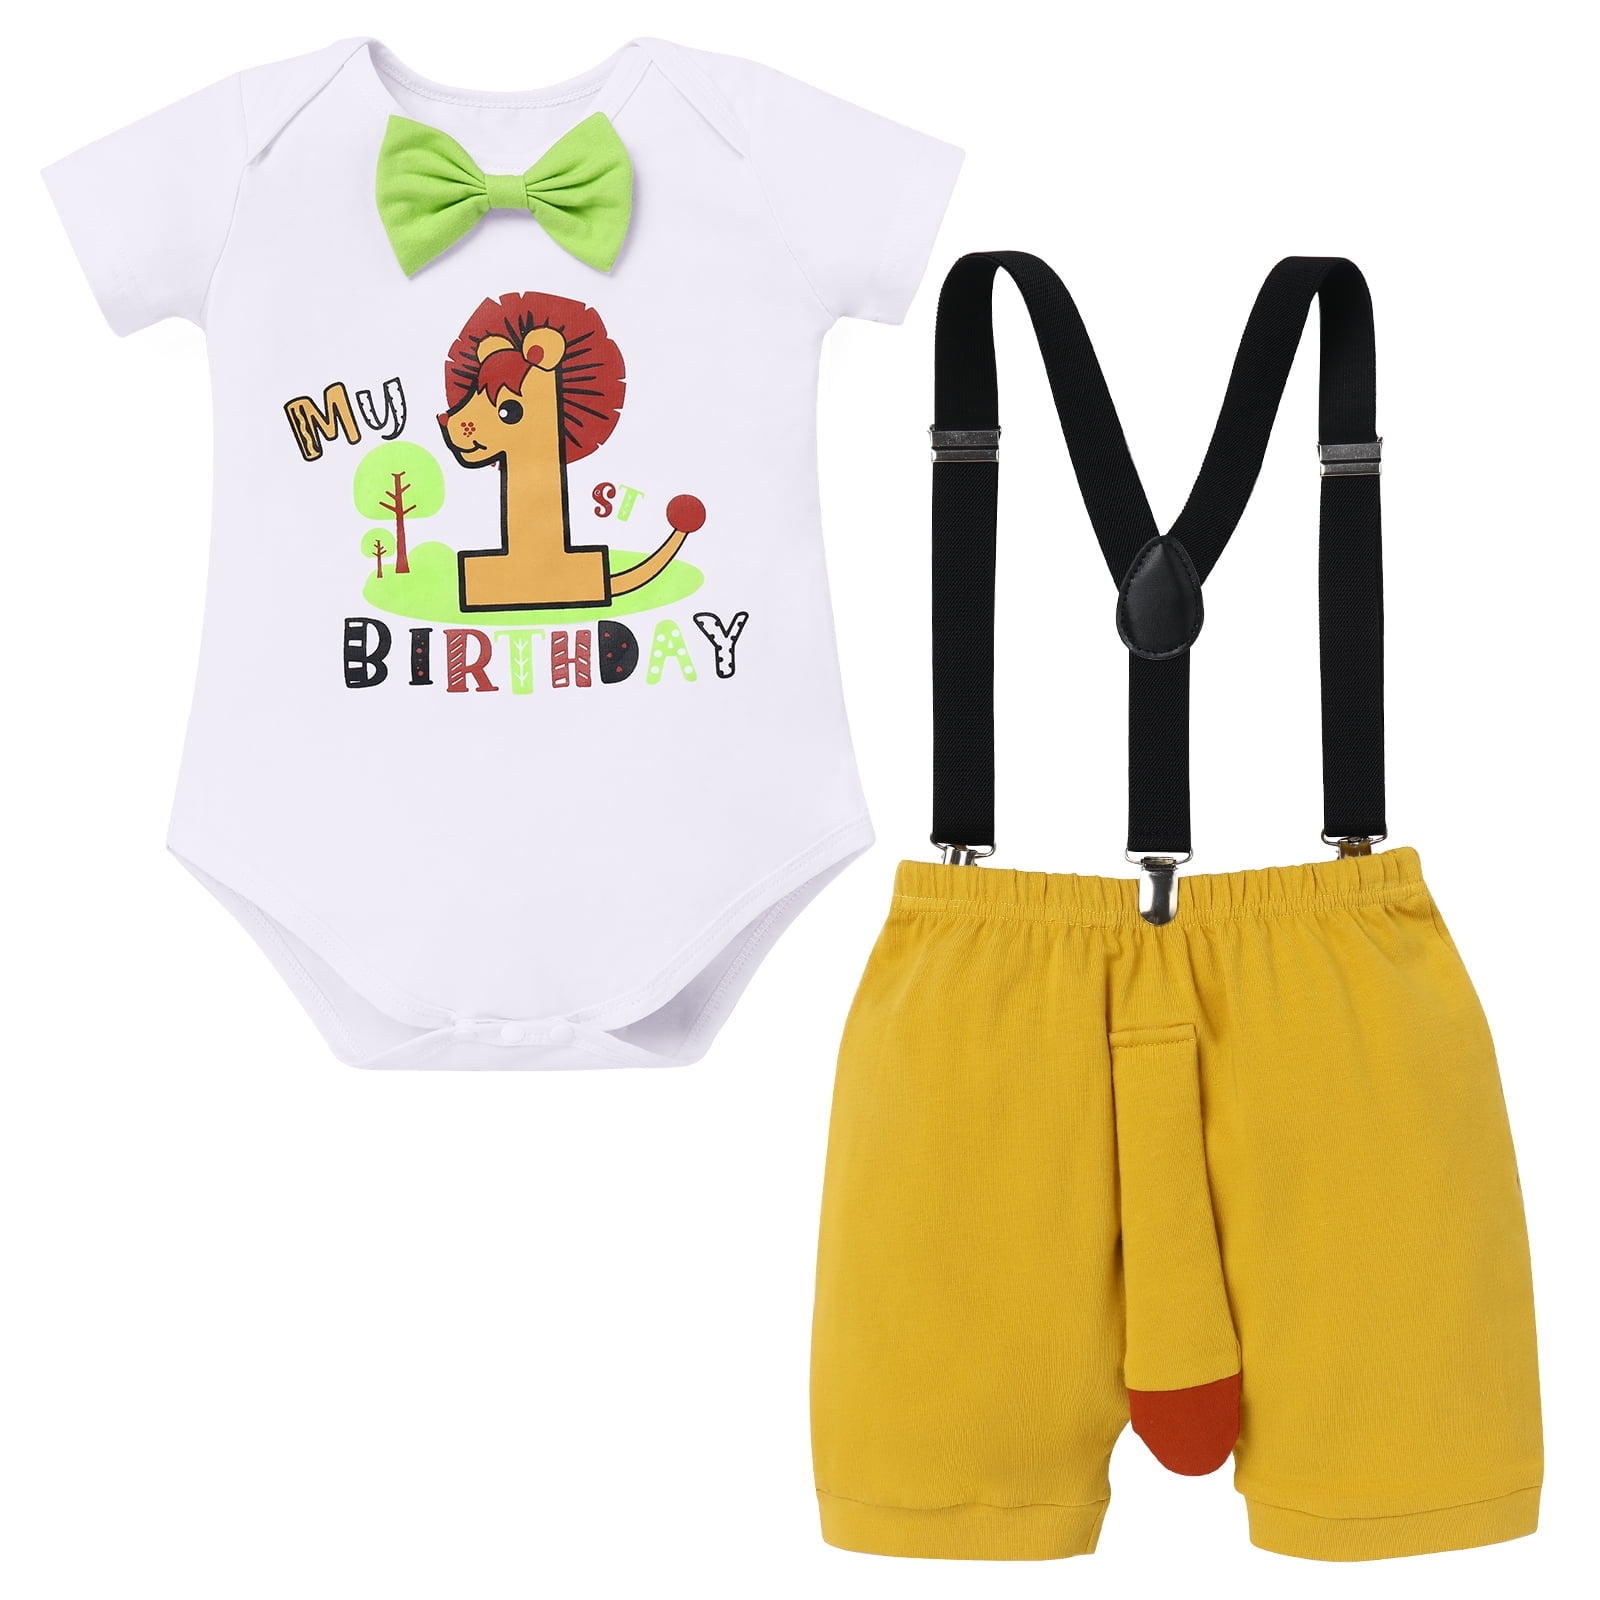 IBTOM CASTLE Baby Boy 1st Birthday Outfit Jungle Woodland Animal Romper +  Bloomers + Suspenders 3PCS Clothes Set Photography 18-24 Months Khaki - 2nd  Birthday 